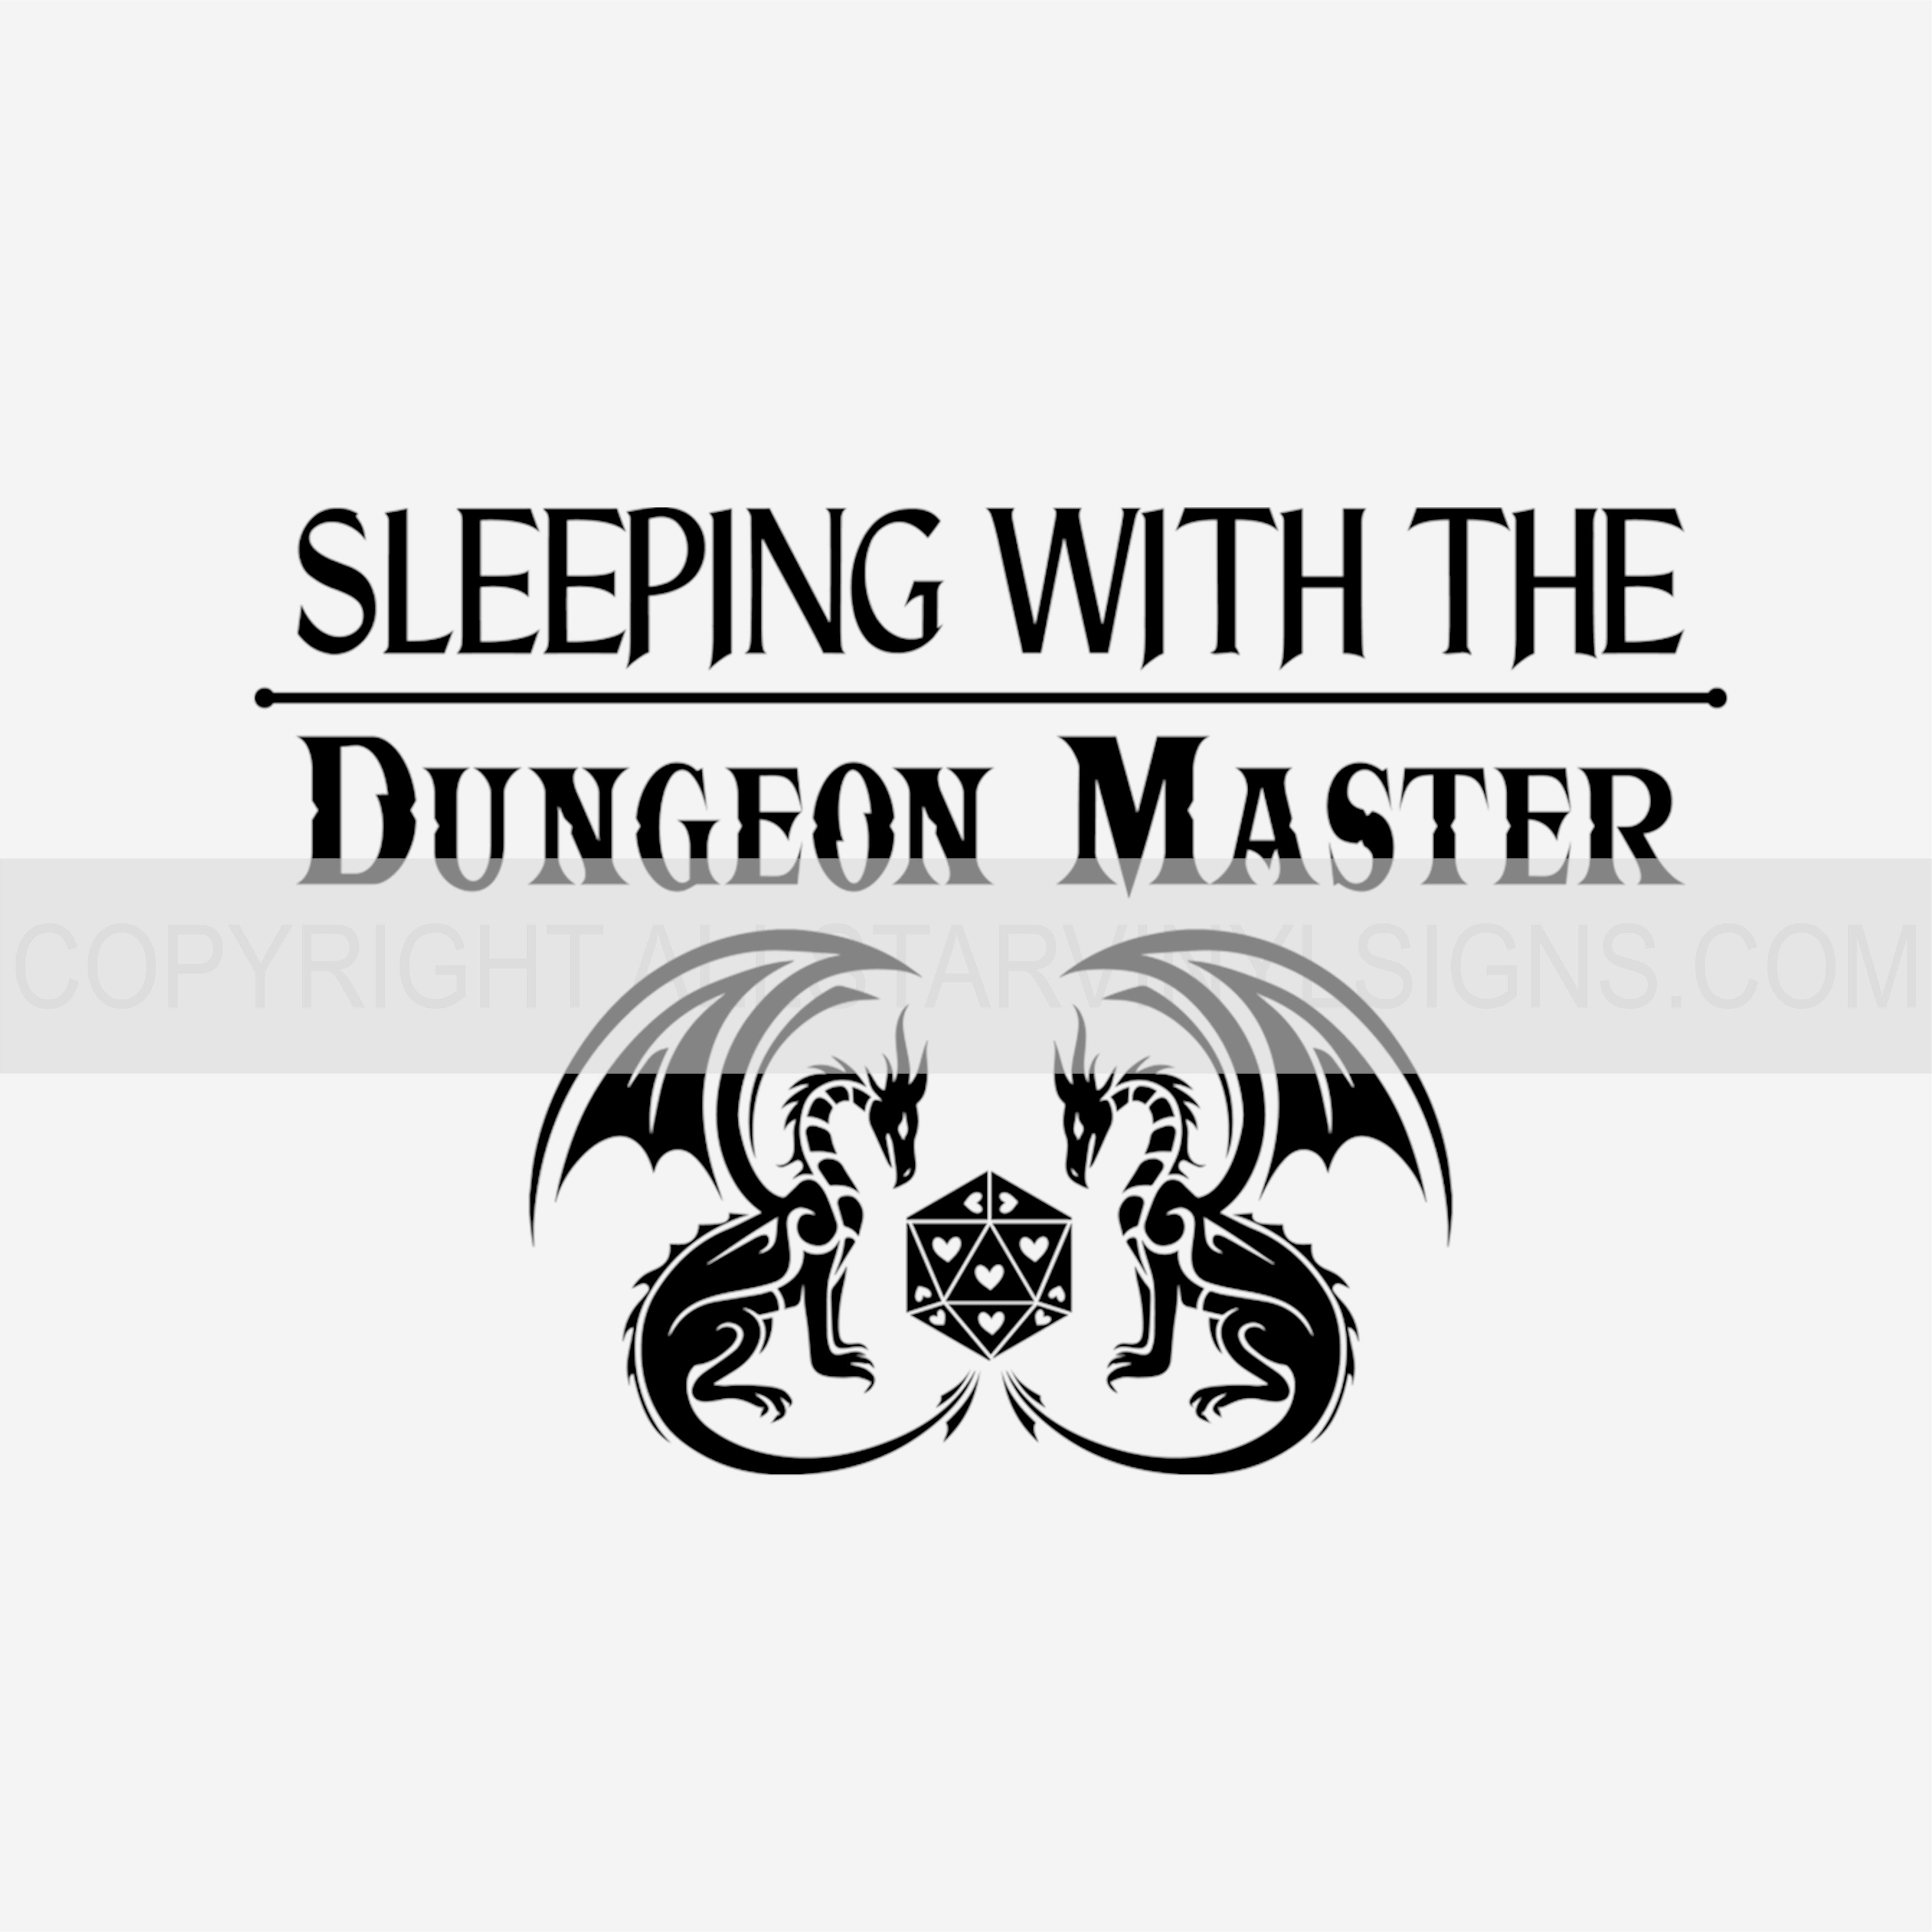 Sleeping With The Dungeon Master